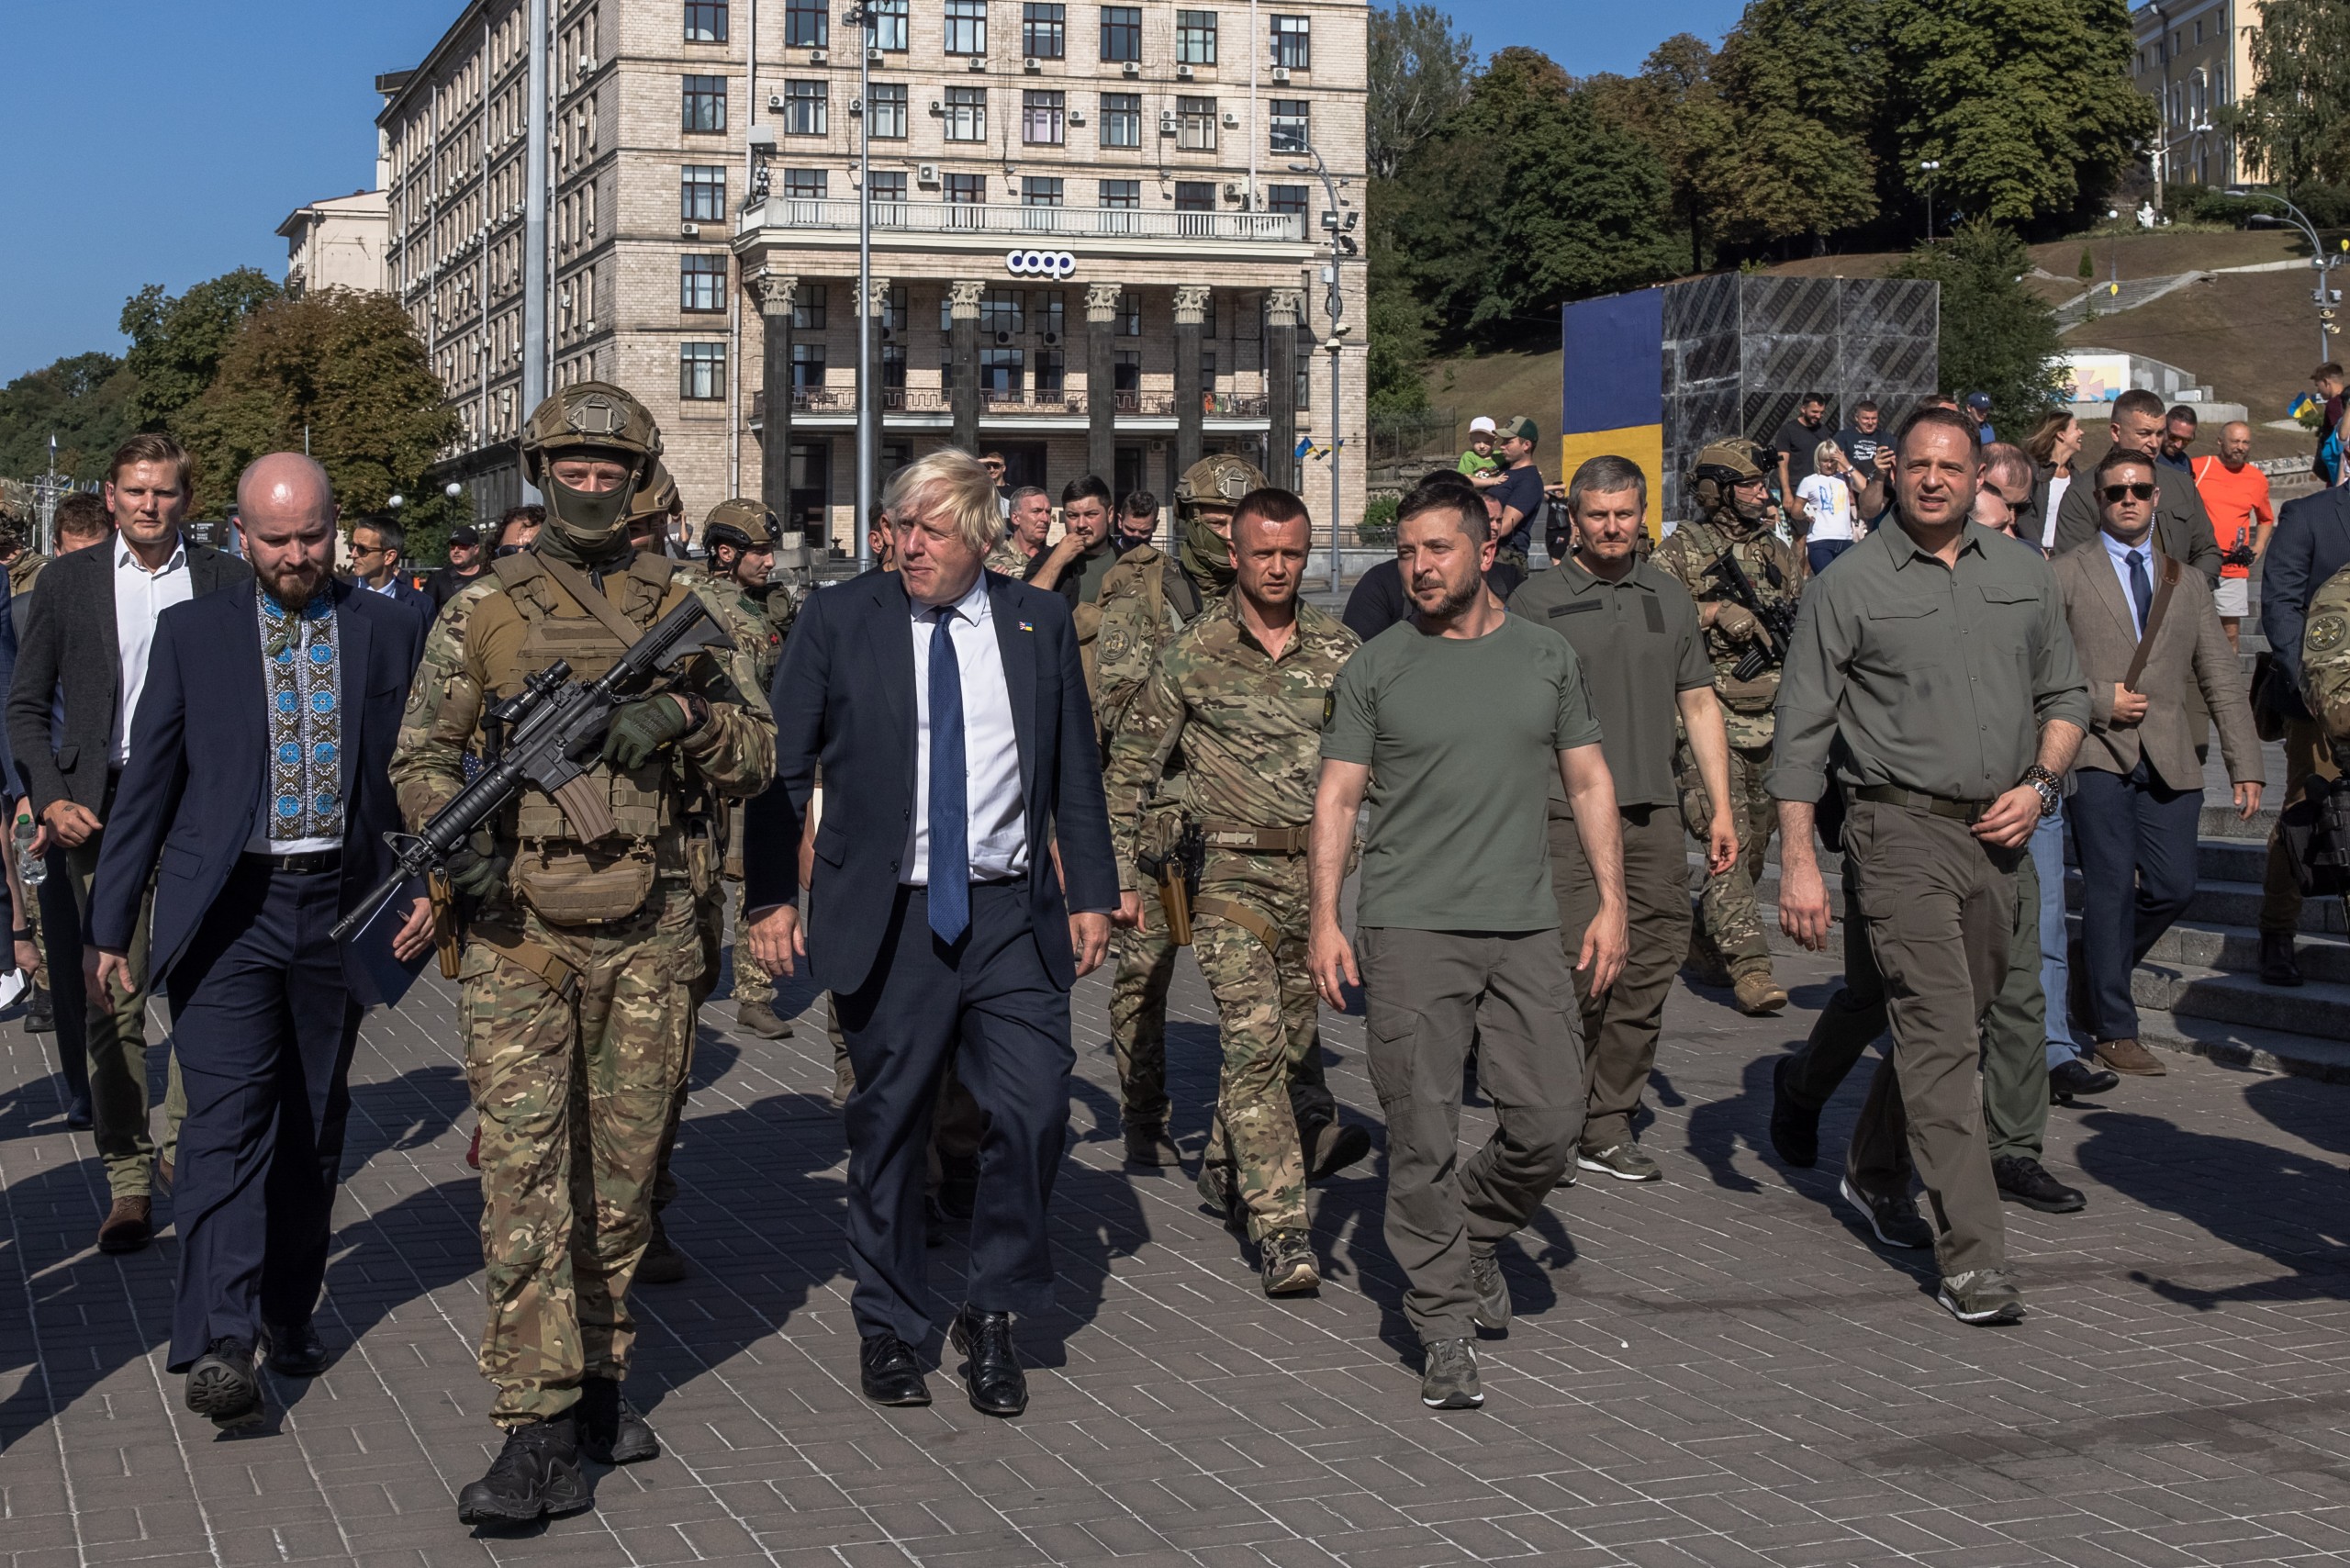 epa10136306 Ukrainian President Volodymyr Zelensky (C-R) walks together with the outgoing British Prime Minister Boris Johnson (C-L) in Khreshchatyk street where Russian armored military vehicles that were captured in fights by the Ukrainian army are placed on display, on Independence Day, in downtown Kyiv, Ukraine, 24 August 2022. Ukrainians mark the 31st anniversary of Ukraine's independence from the Soviet Union in 1991, as the Russian invasion continues six months since its beginning. Russian troops on 24 February entered Ukrainian territory, starting the conflict that has provoked destruction and a humanitarian crisis.  EPA/ROMAN PILIPEY